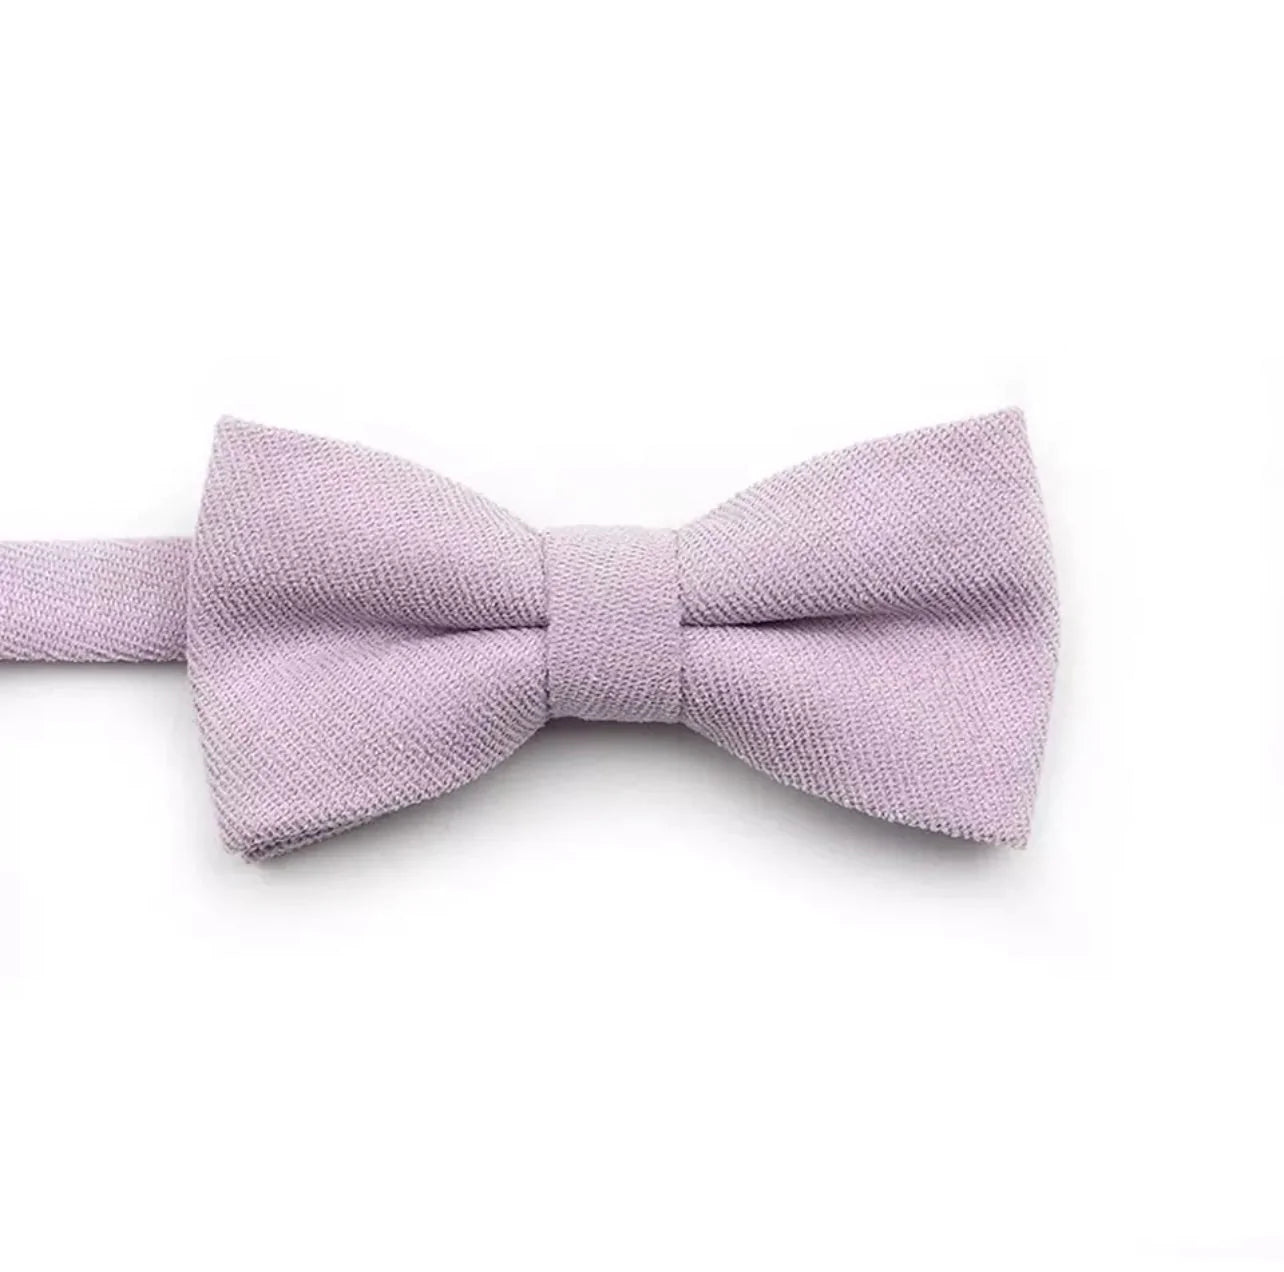 Purple bow tie for kids &amp; boys (pre tied) weddings REMI - MYTIESHOP-Purple Bow tie for kids Bow Tie 10.5 * 6CMfor toddlers and kidsColor: Purple Adjustable strap - easy to clip Your little one is sure to make a stylish statement in this bow tie. Whether dressing up for a formal event or simply wanting to add a touch of personality to their outfit, this bow tie is a perfect choice. It&#39;s also a great choice for ring bearers or as a special gift. With its easy-to-use clip, your child will be able t